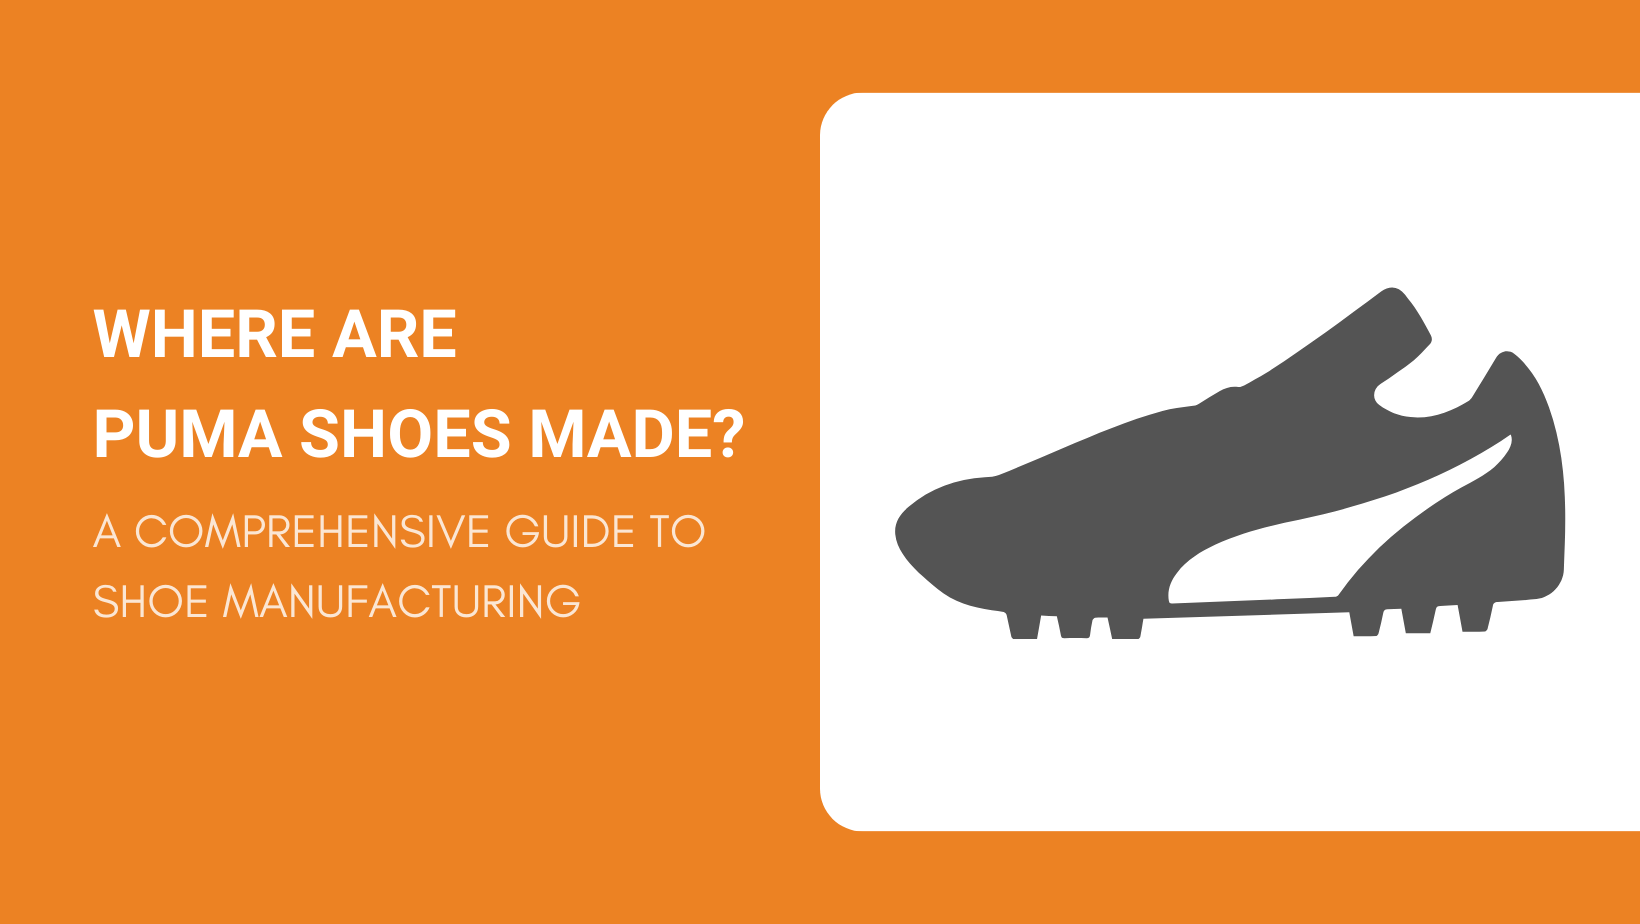 Where Are Puma Shoes Made? A Comprehensive Guide to Shoe Manufacturing